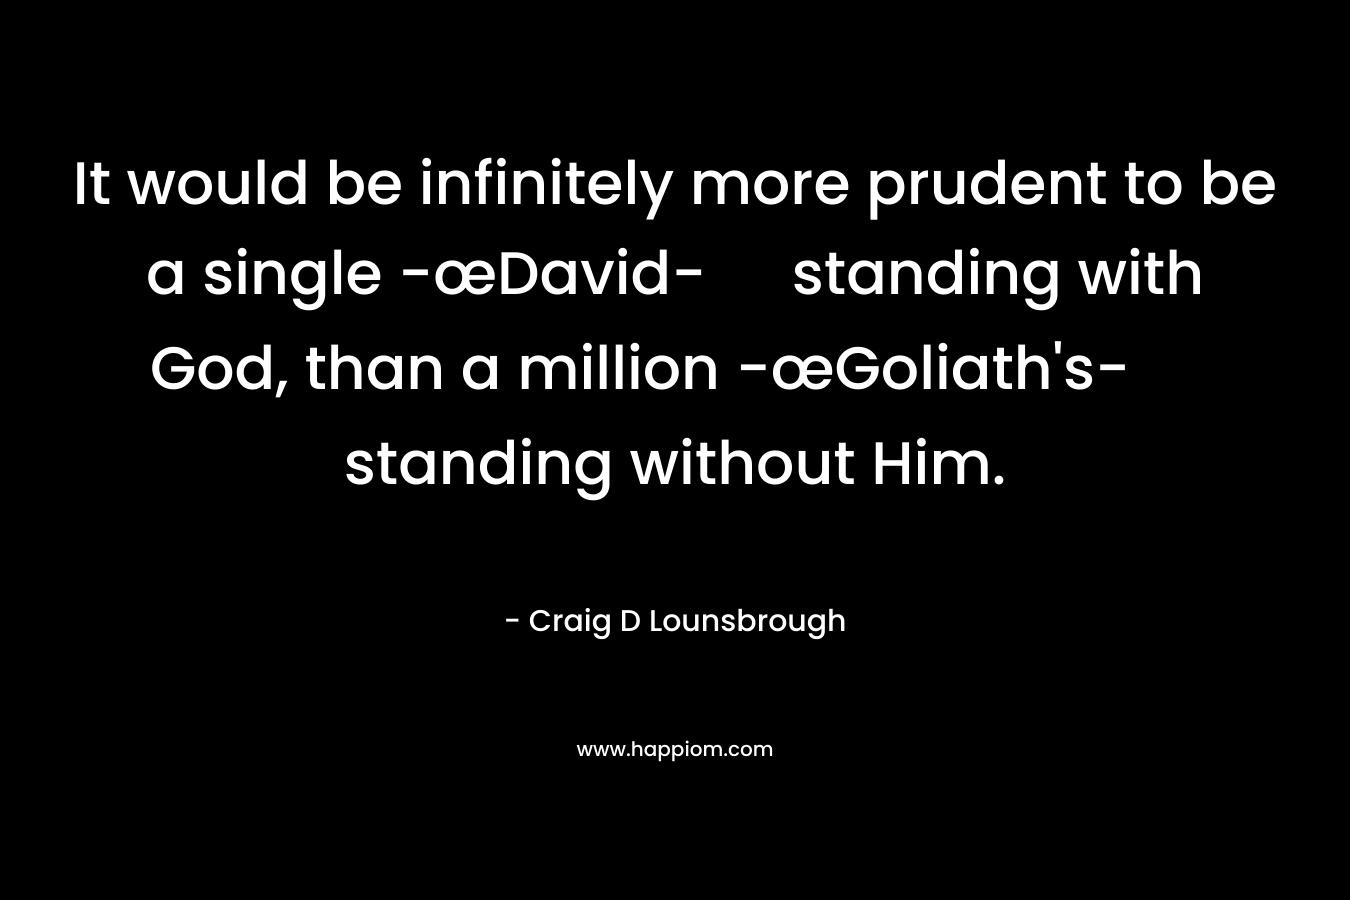 It would be infinitely more prudent to be a single -œDavid- standing with God, than a million -œGoliath’s- standing without Him. – Craig D Lounsbrough